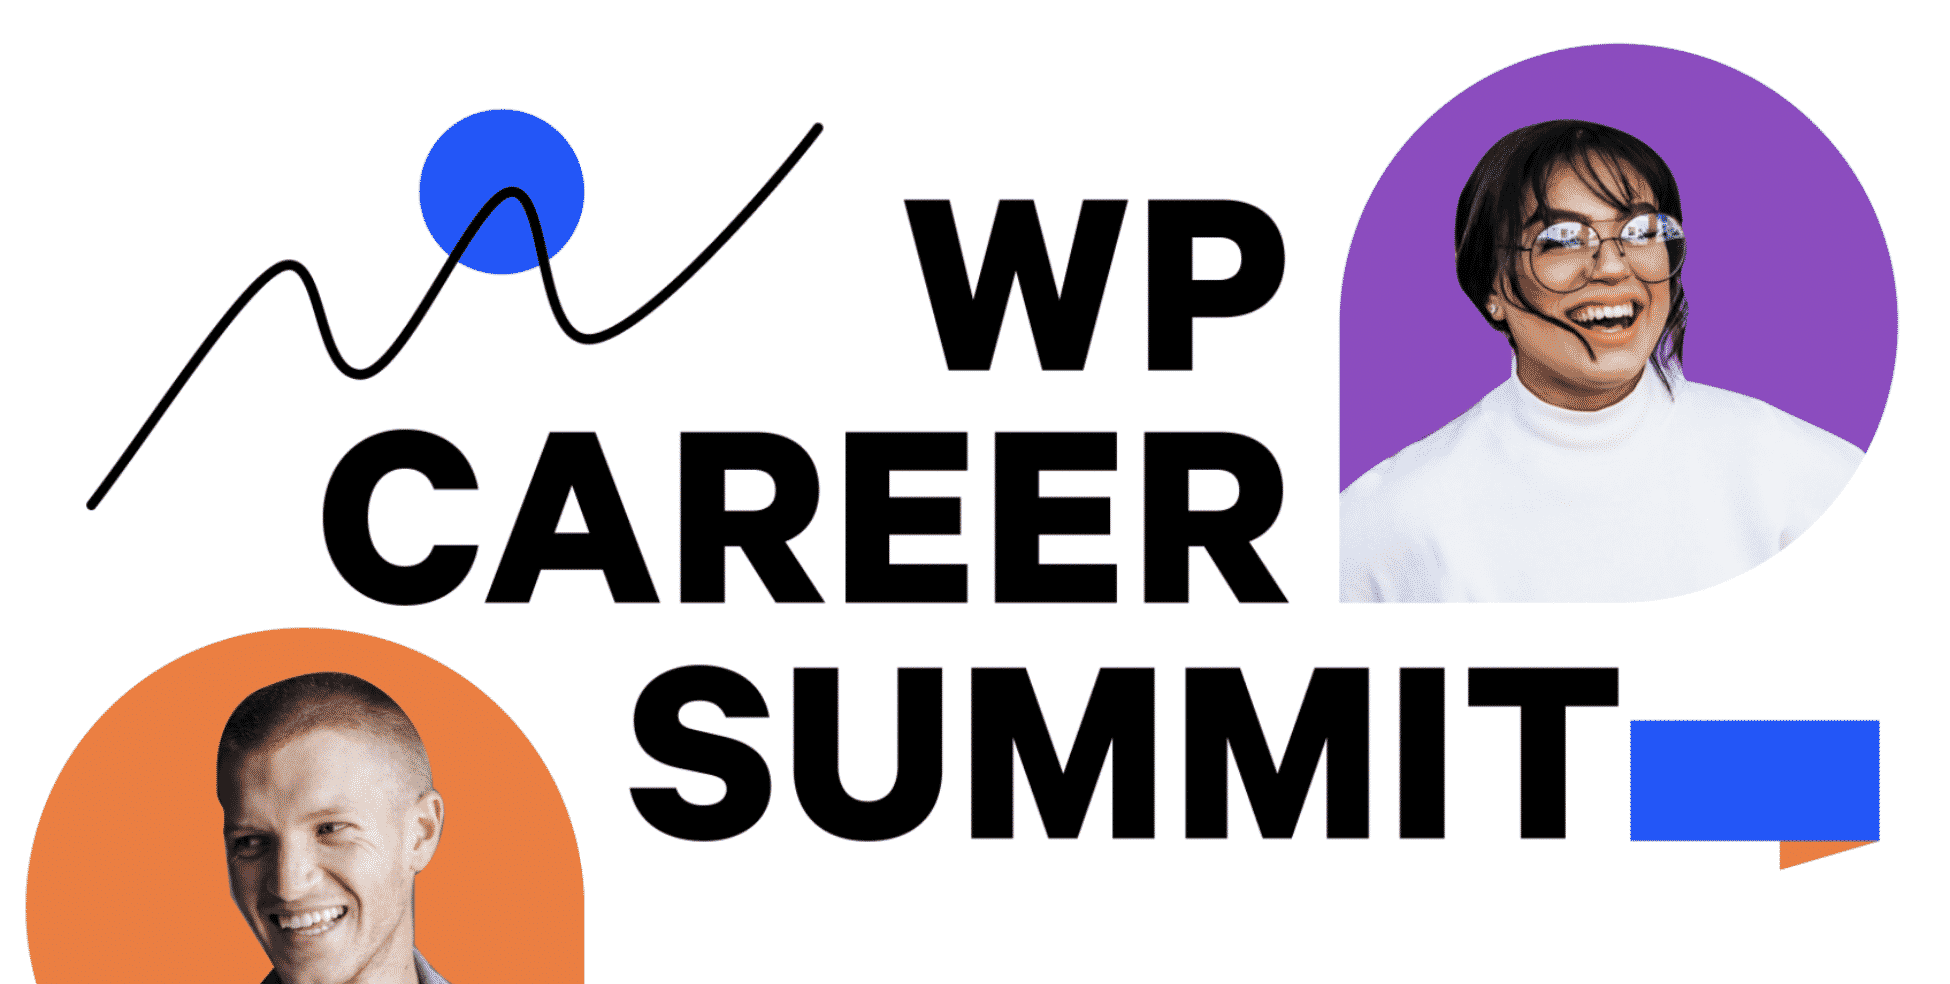 wp-career-summit-opens-registration-calls-for-speakers-and-sponsors WP職業峰會開放註冊，徵集演講者和贊助商